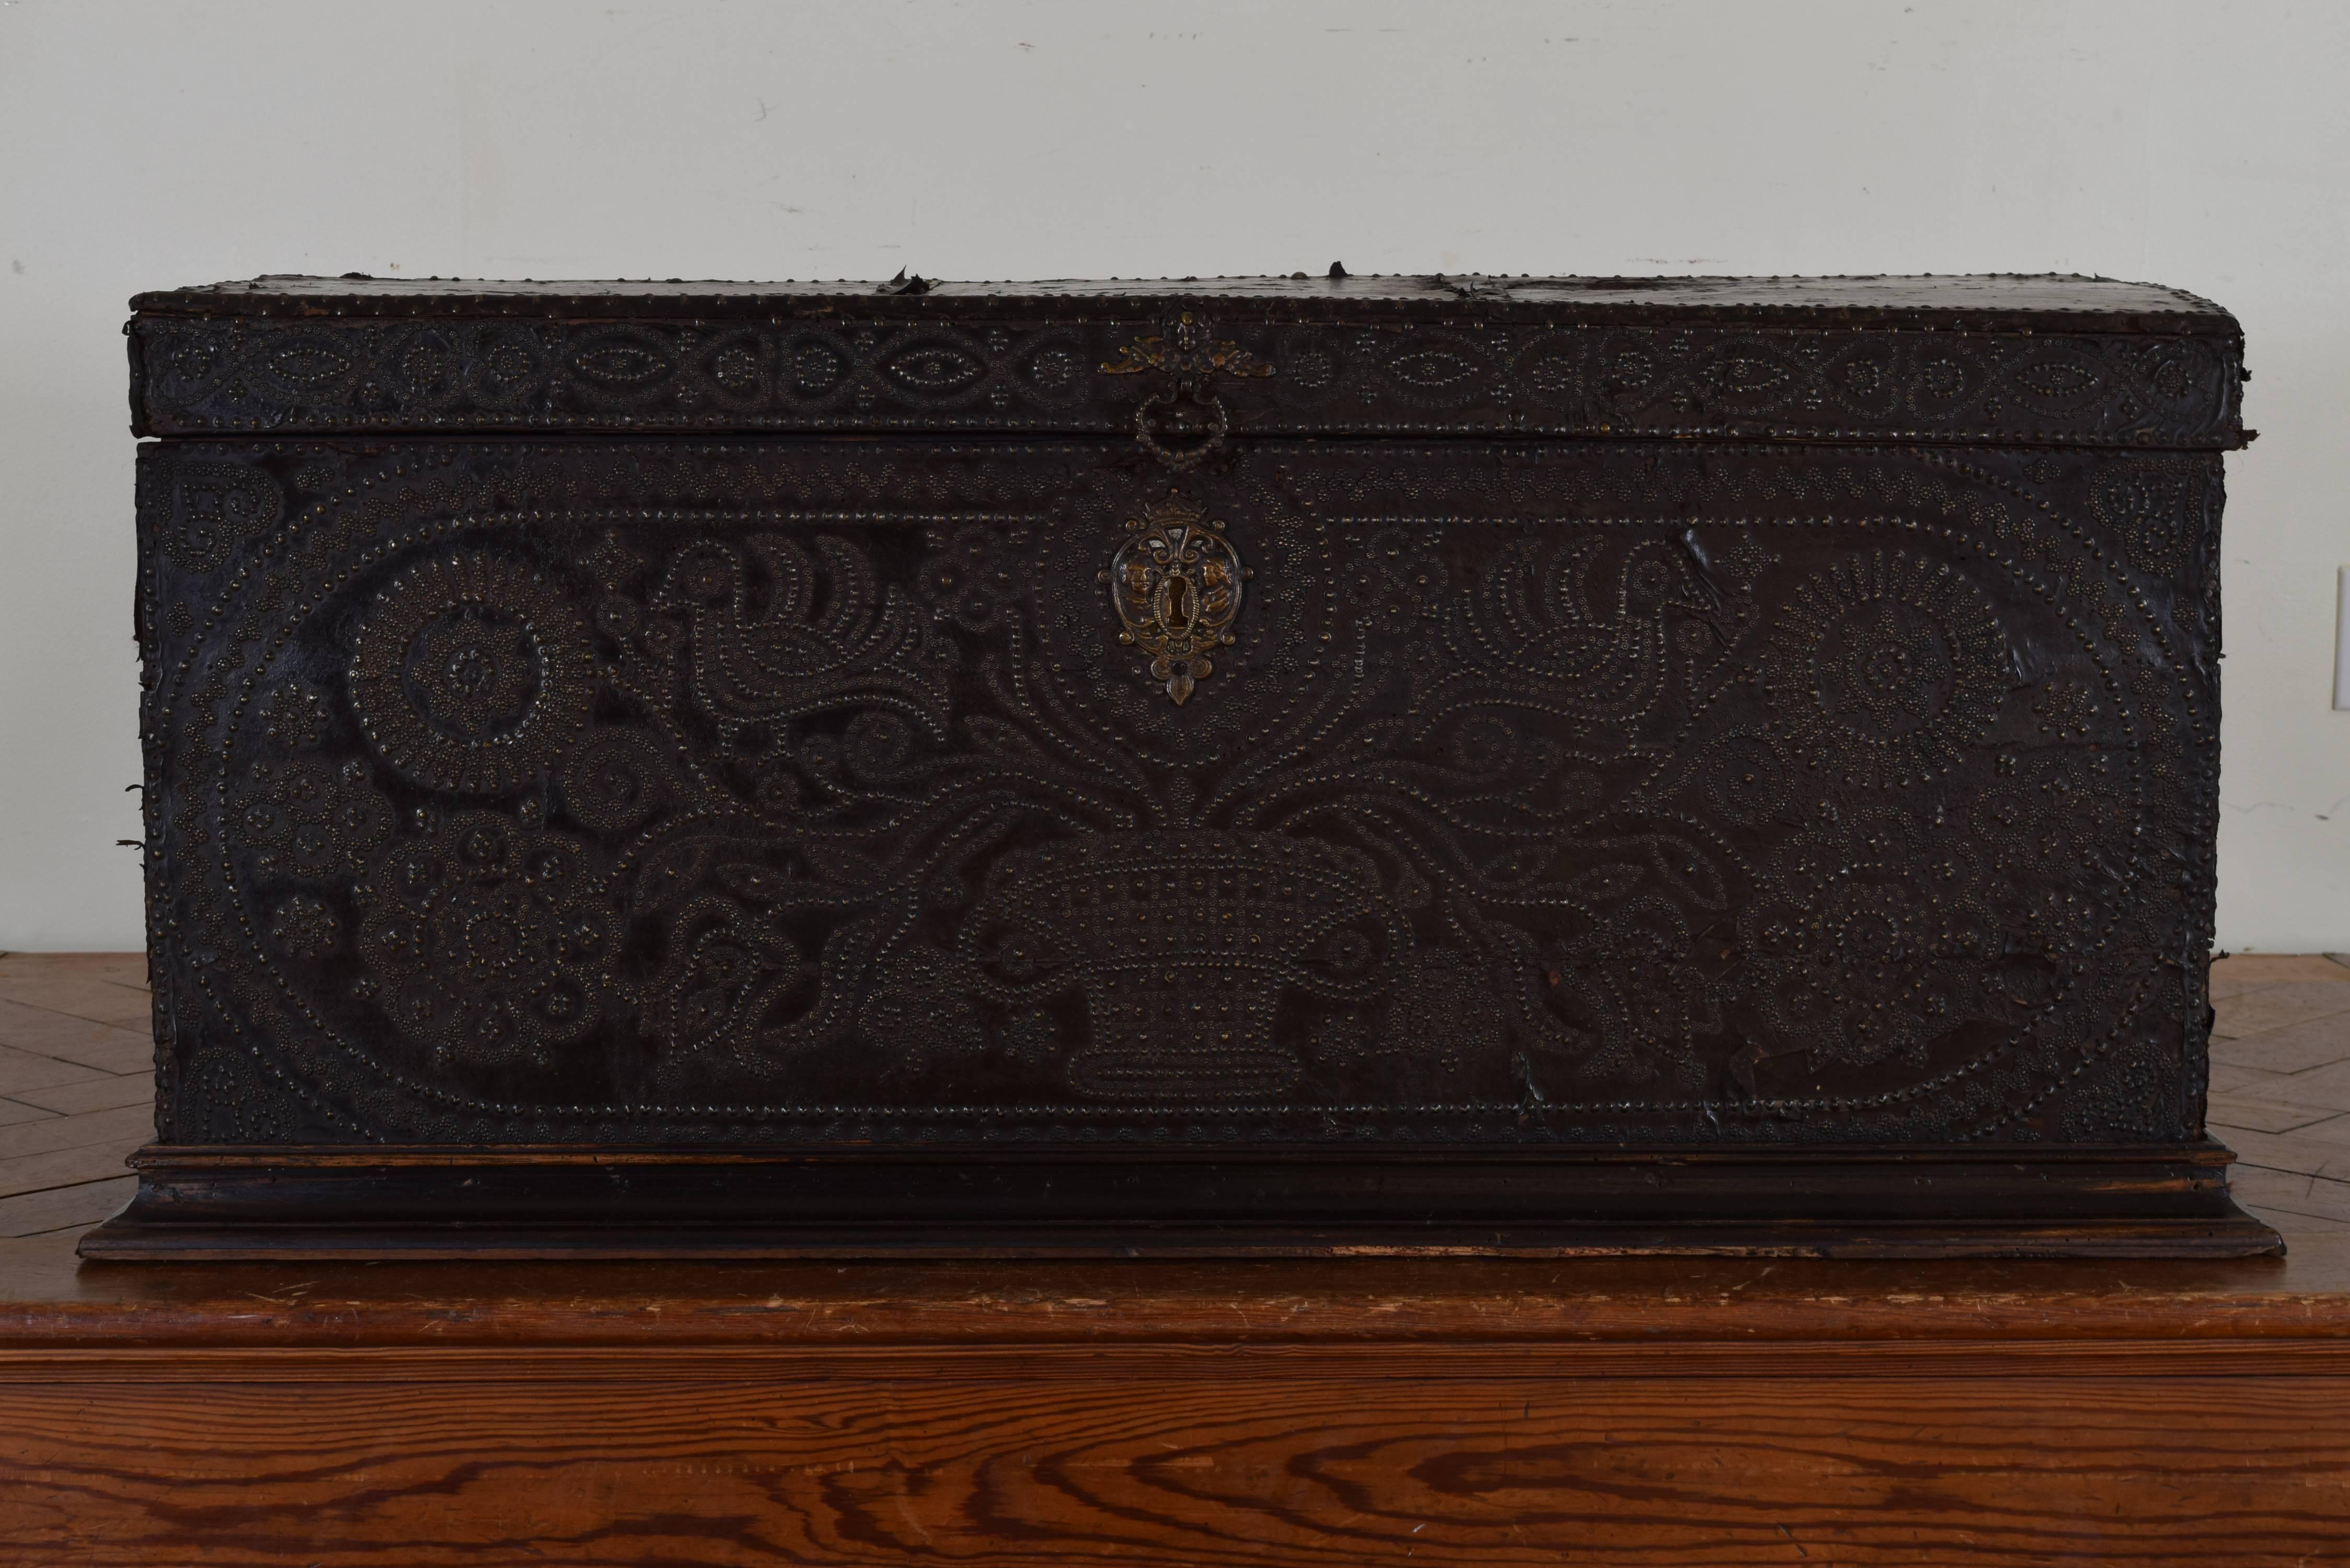 Of very shallow proportion and having been used at the rear of a coach, raised on a molded walnut Stand, having iron carrying handles and decorated with brass decorations and nailheads, 17th century.